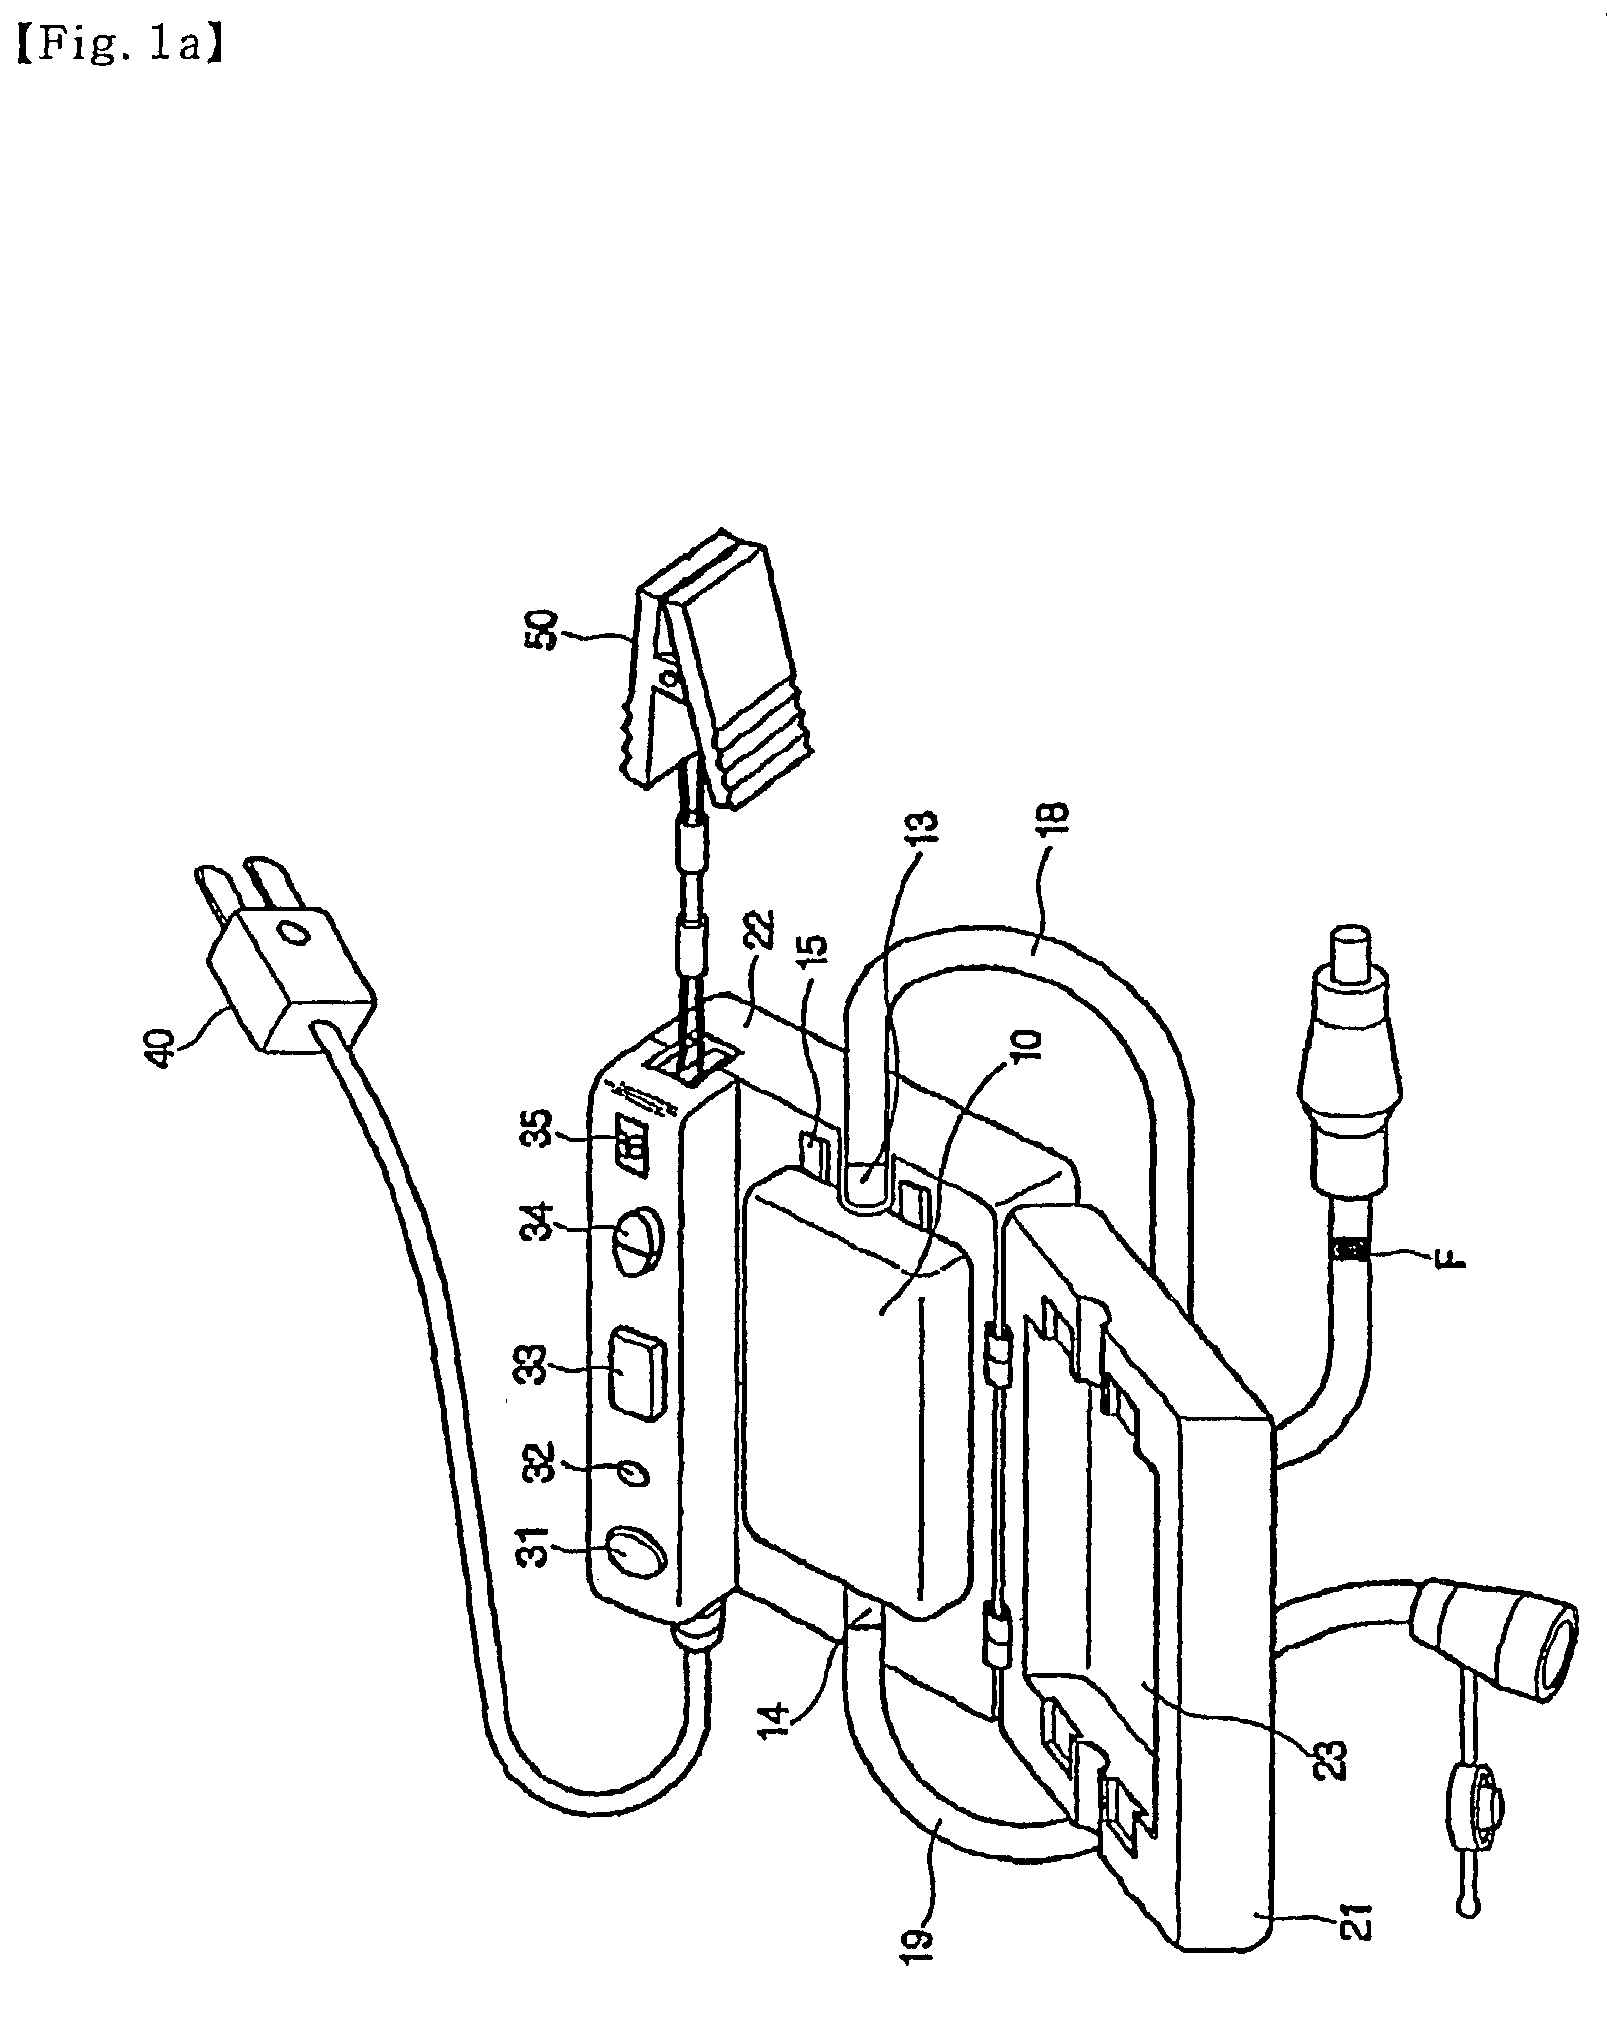 Warmer for medical treatment and its control method